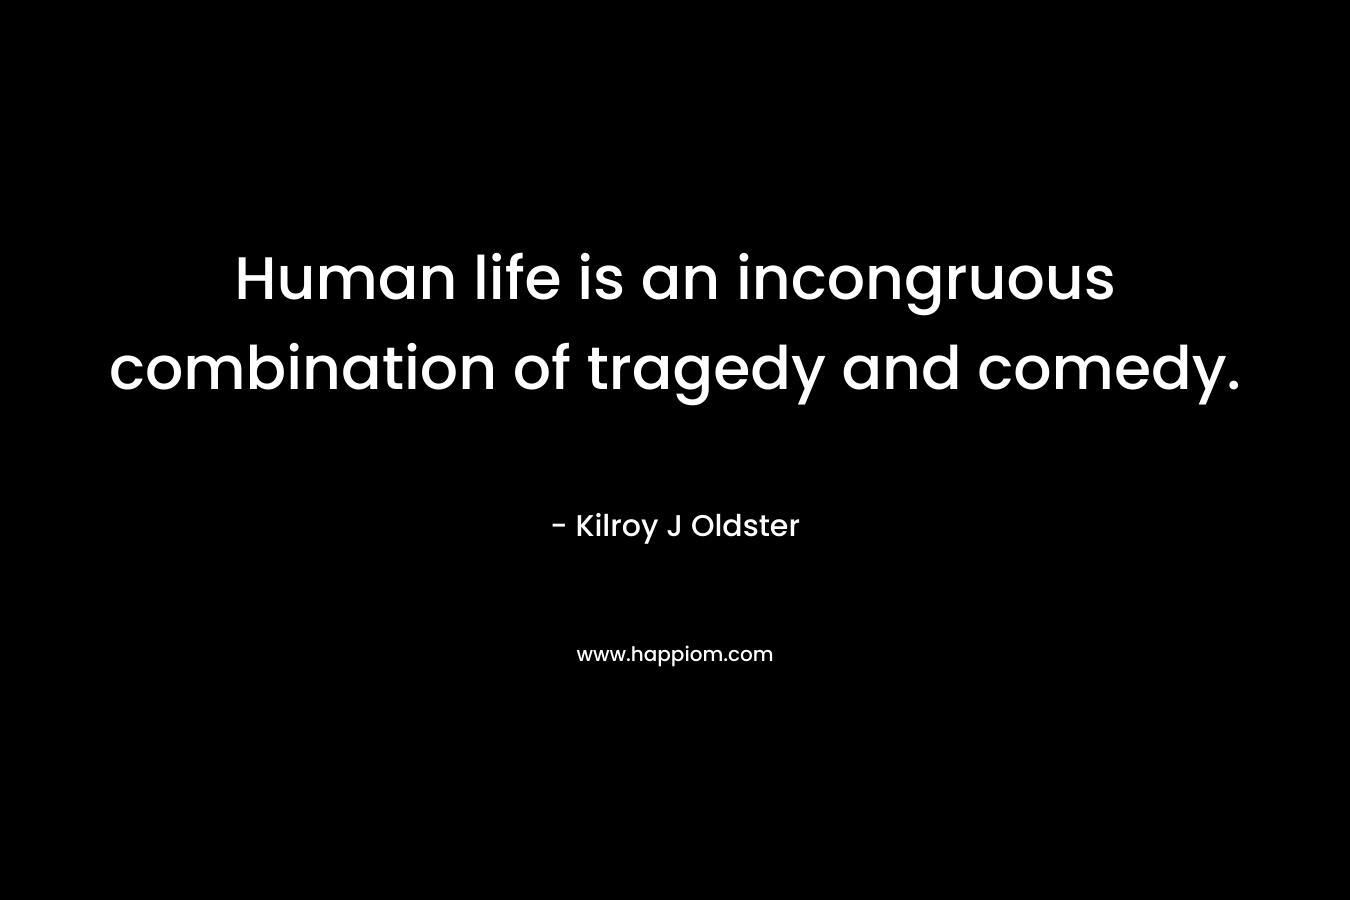 Human life is an incongruous combination of tragedy and comedy. – Kilroy J Oldster